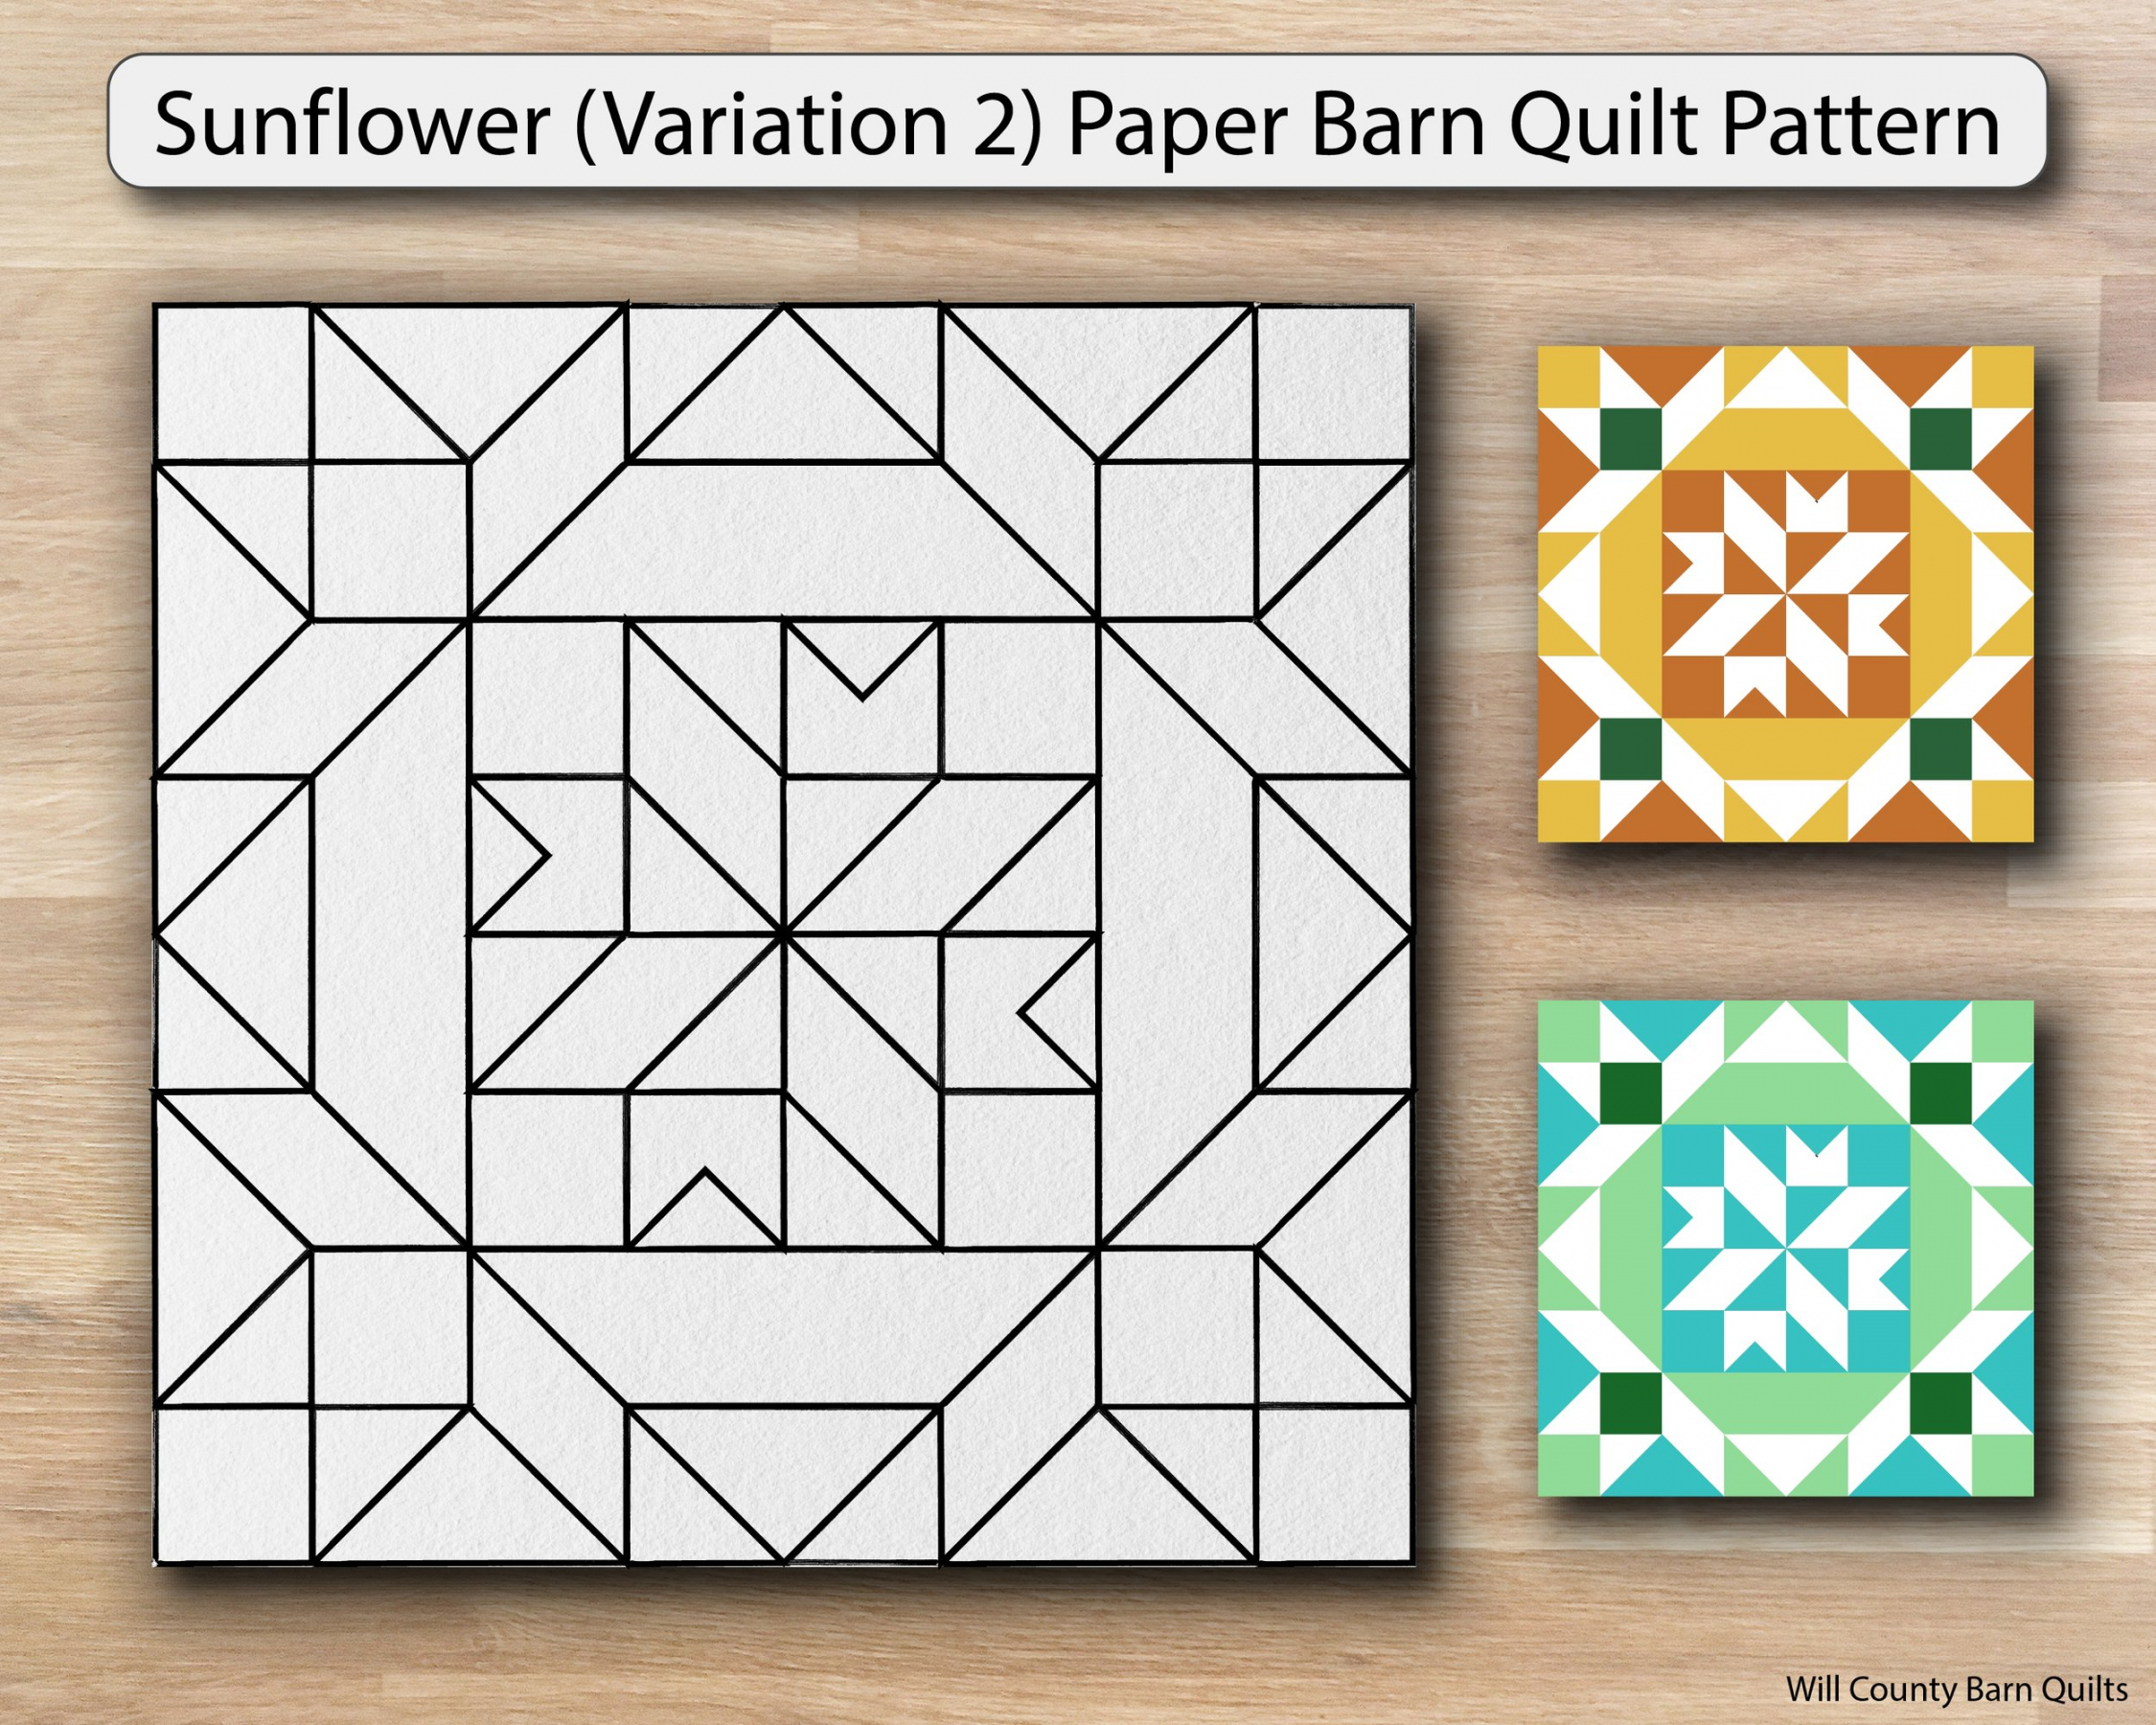 Easy Free Printable Barn Quilt Patterns - Printable - Paper Barn Quilt Patterns for Barn Quilt Trail, Will County